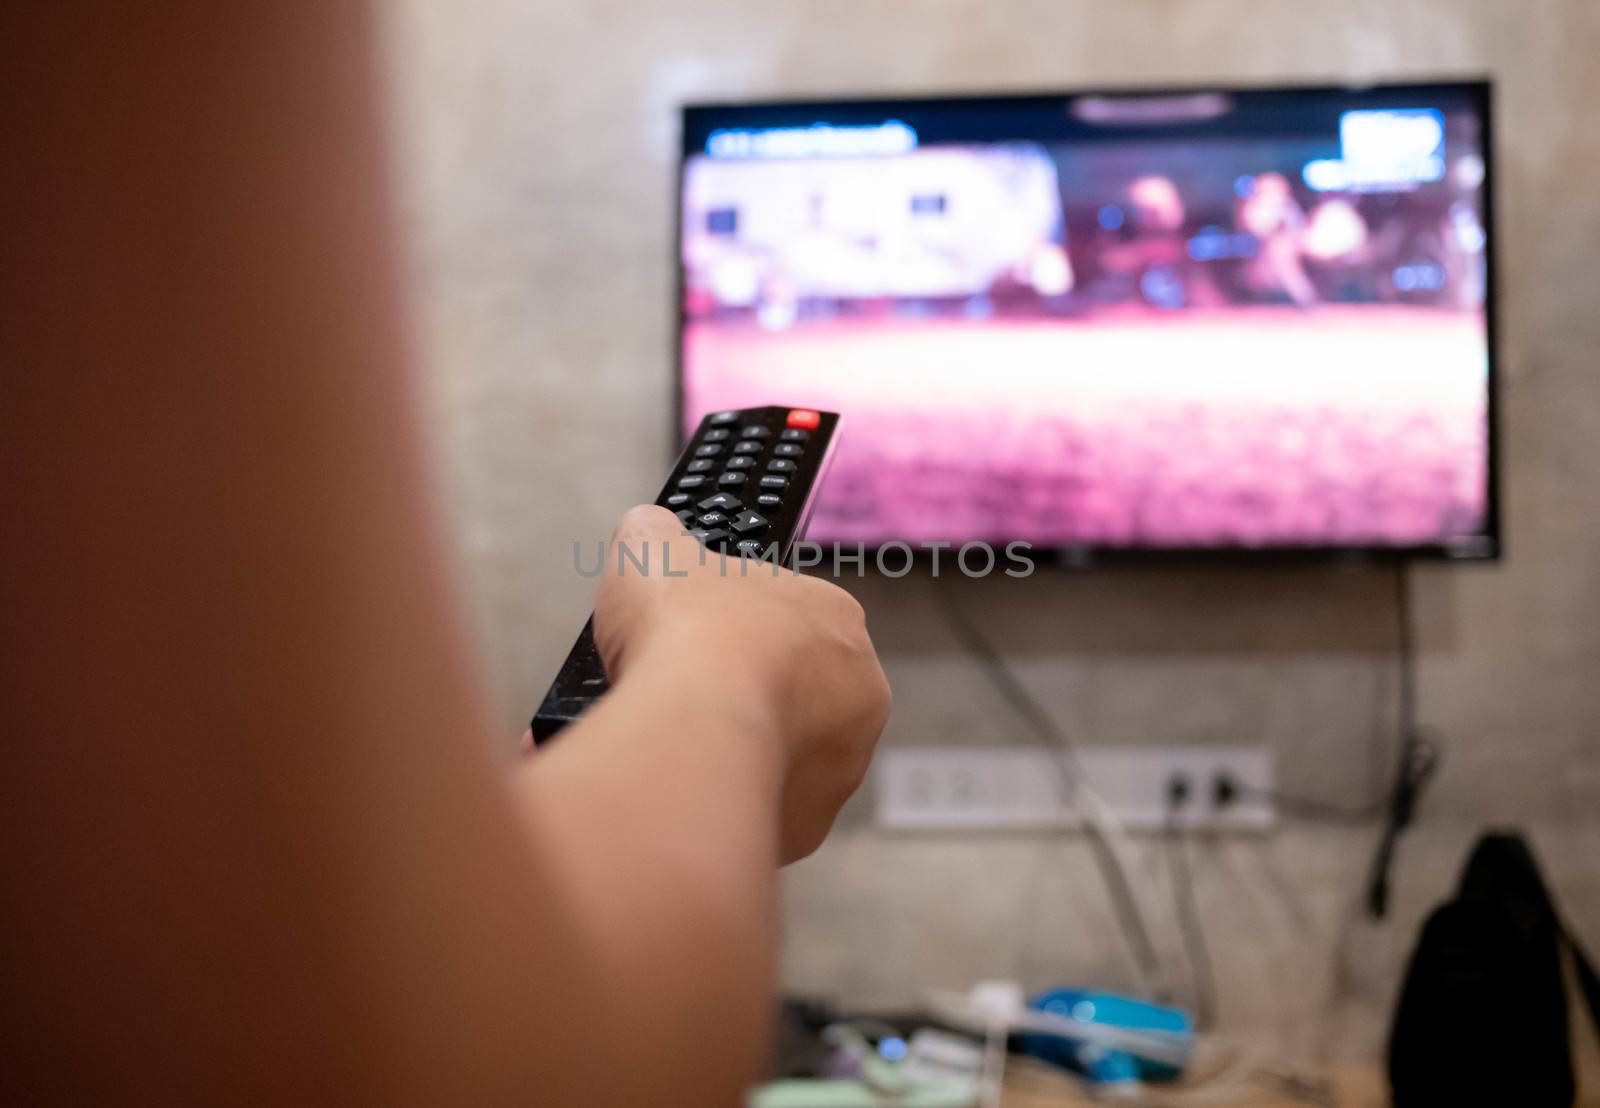 Asian young woman watching TV in the room with remote control in her hand to adjust volume or changing TV channel. Relaxation in living room. Selective focus.